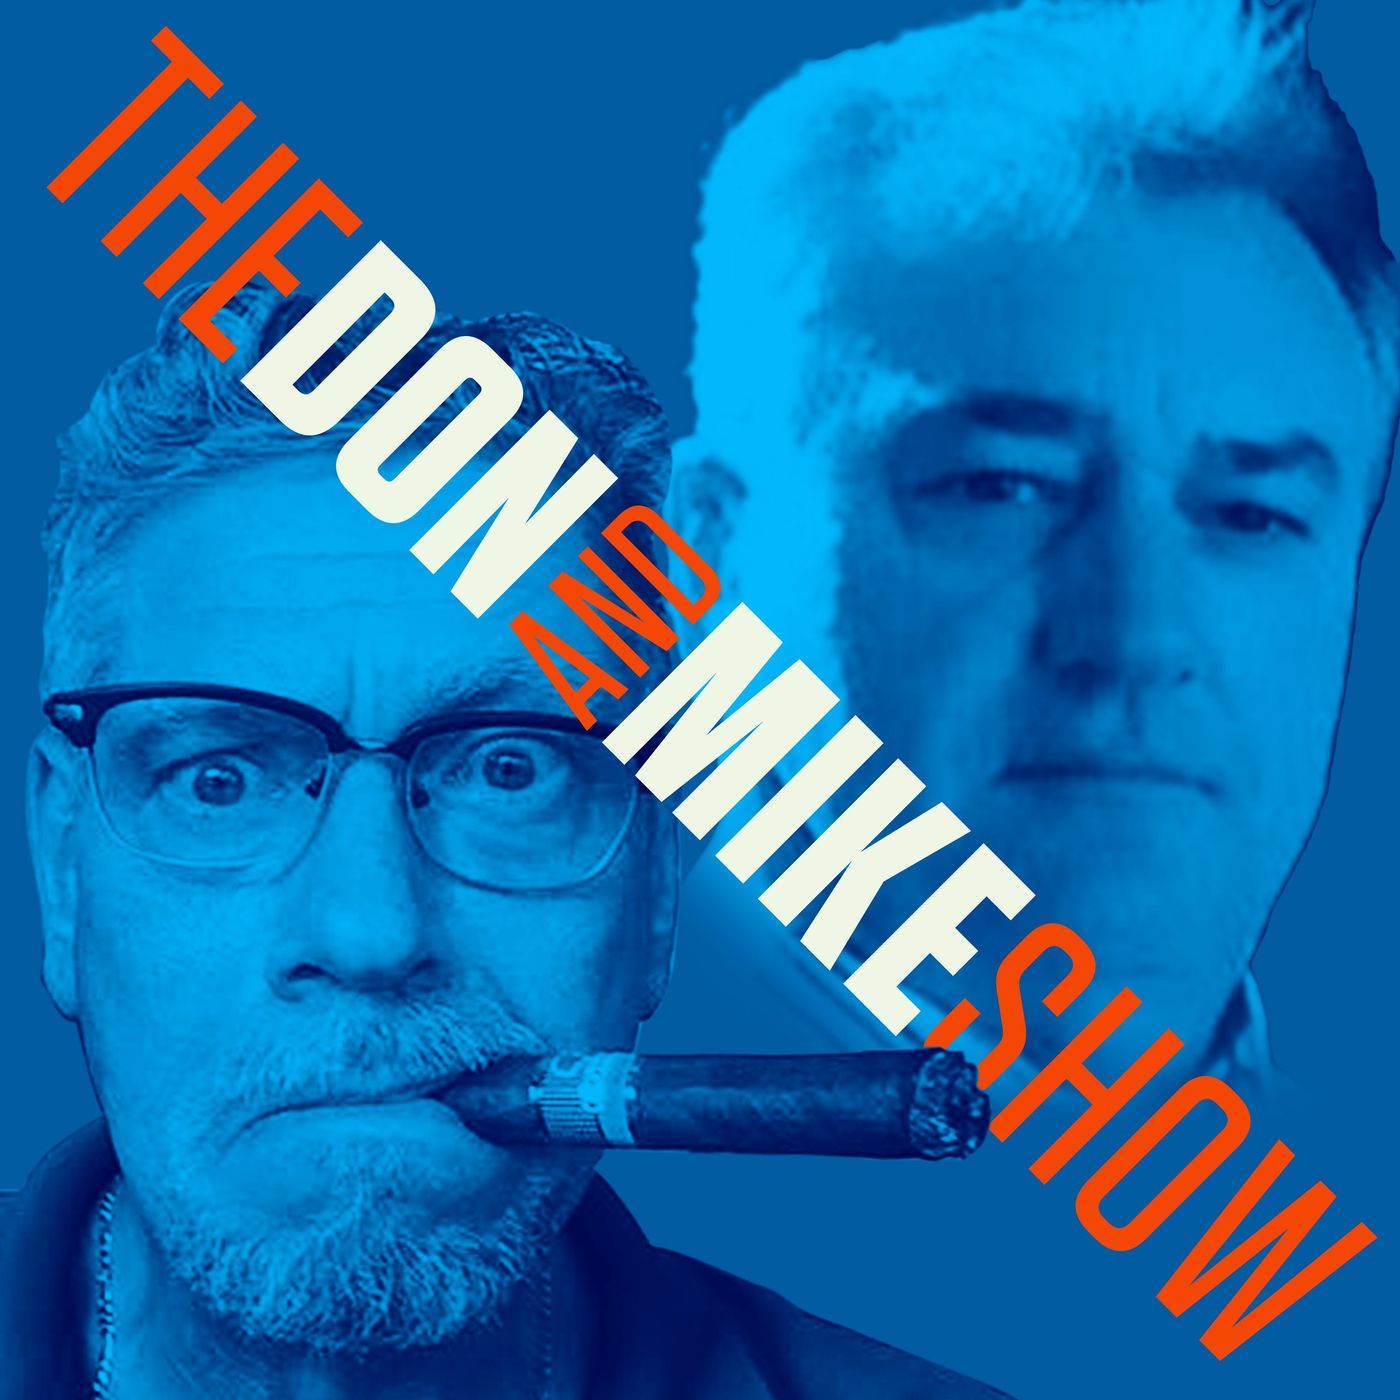 Farewell from Don and Mike